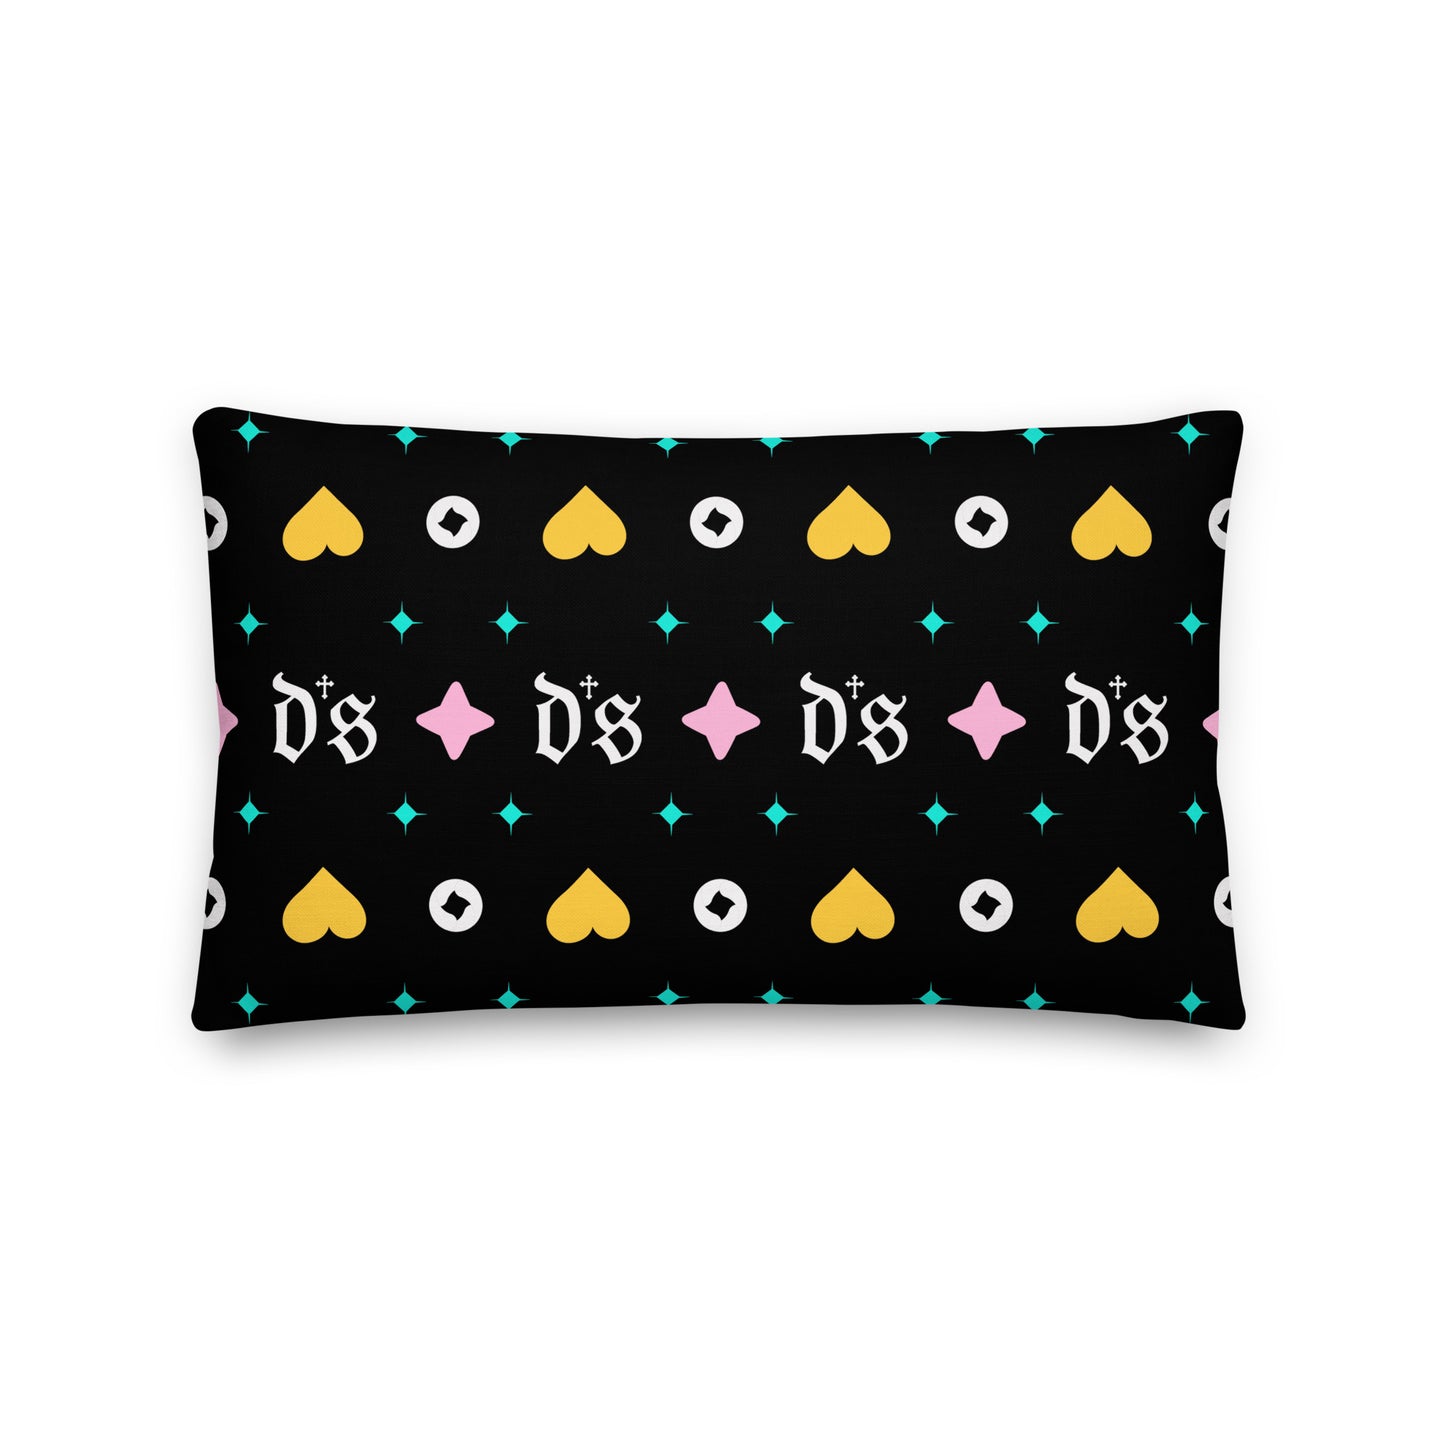 All Over You - DS Island Kings Premium Pillow Black